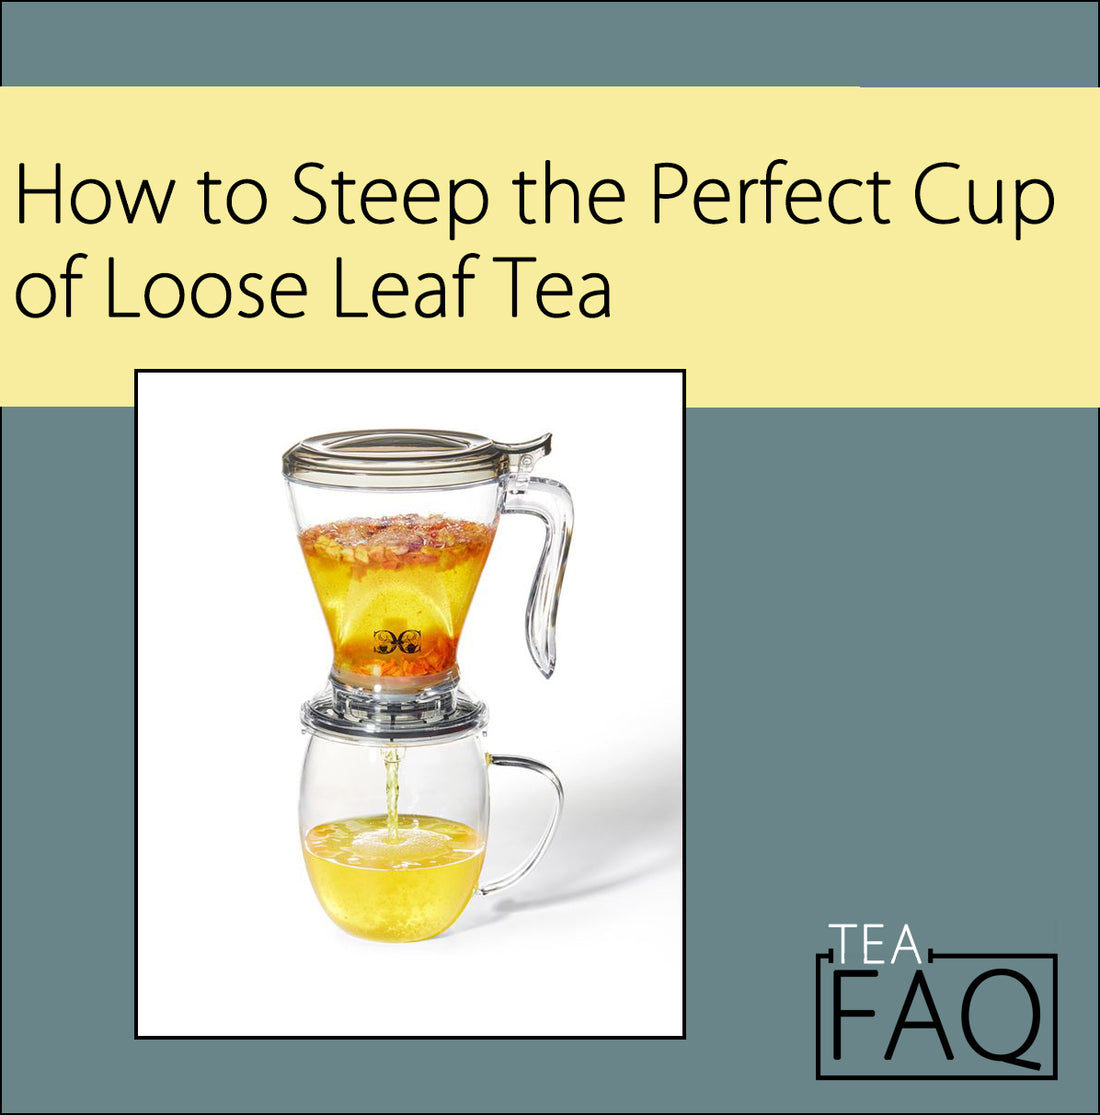 How to Brew / Steep the Perfect Cup of Loose Leaf Tea